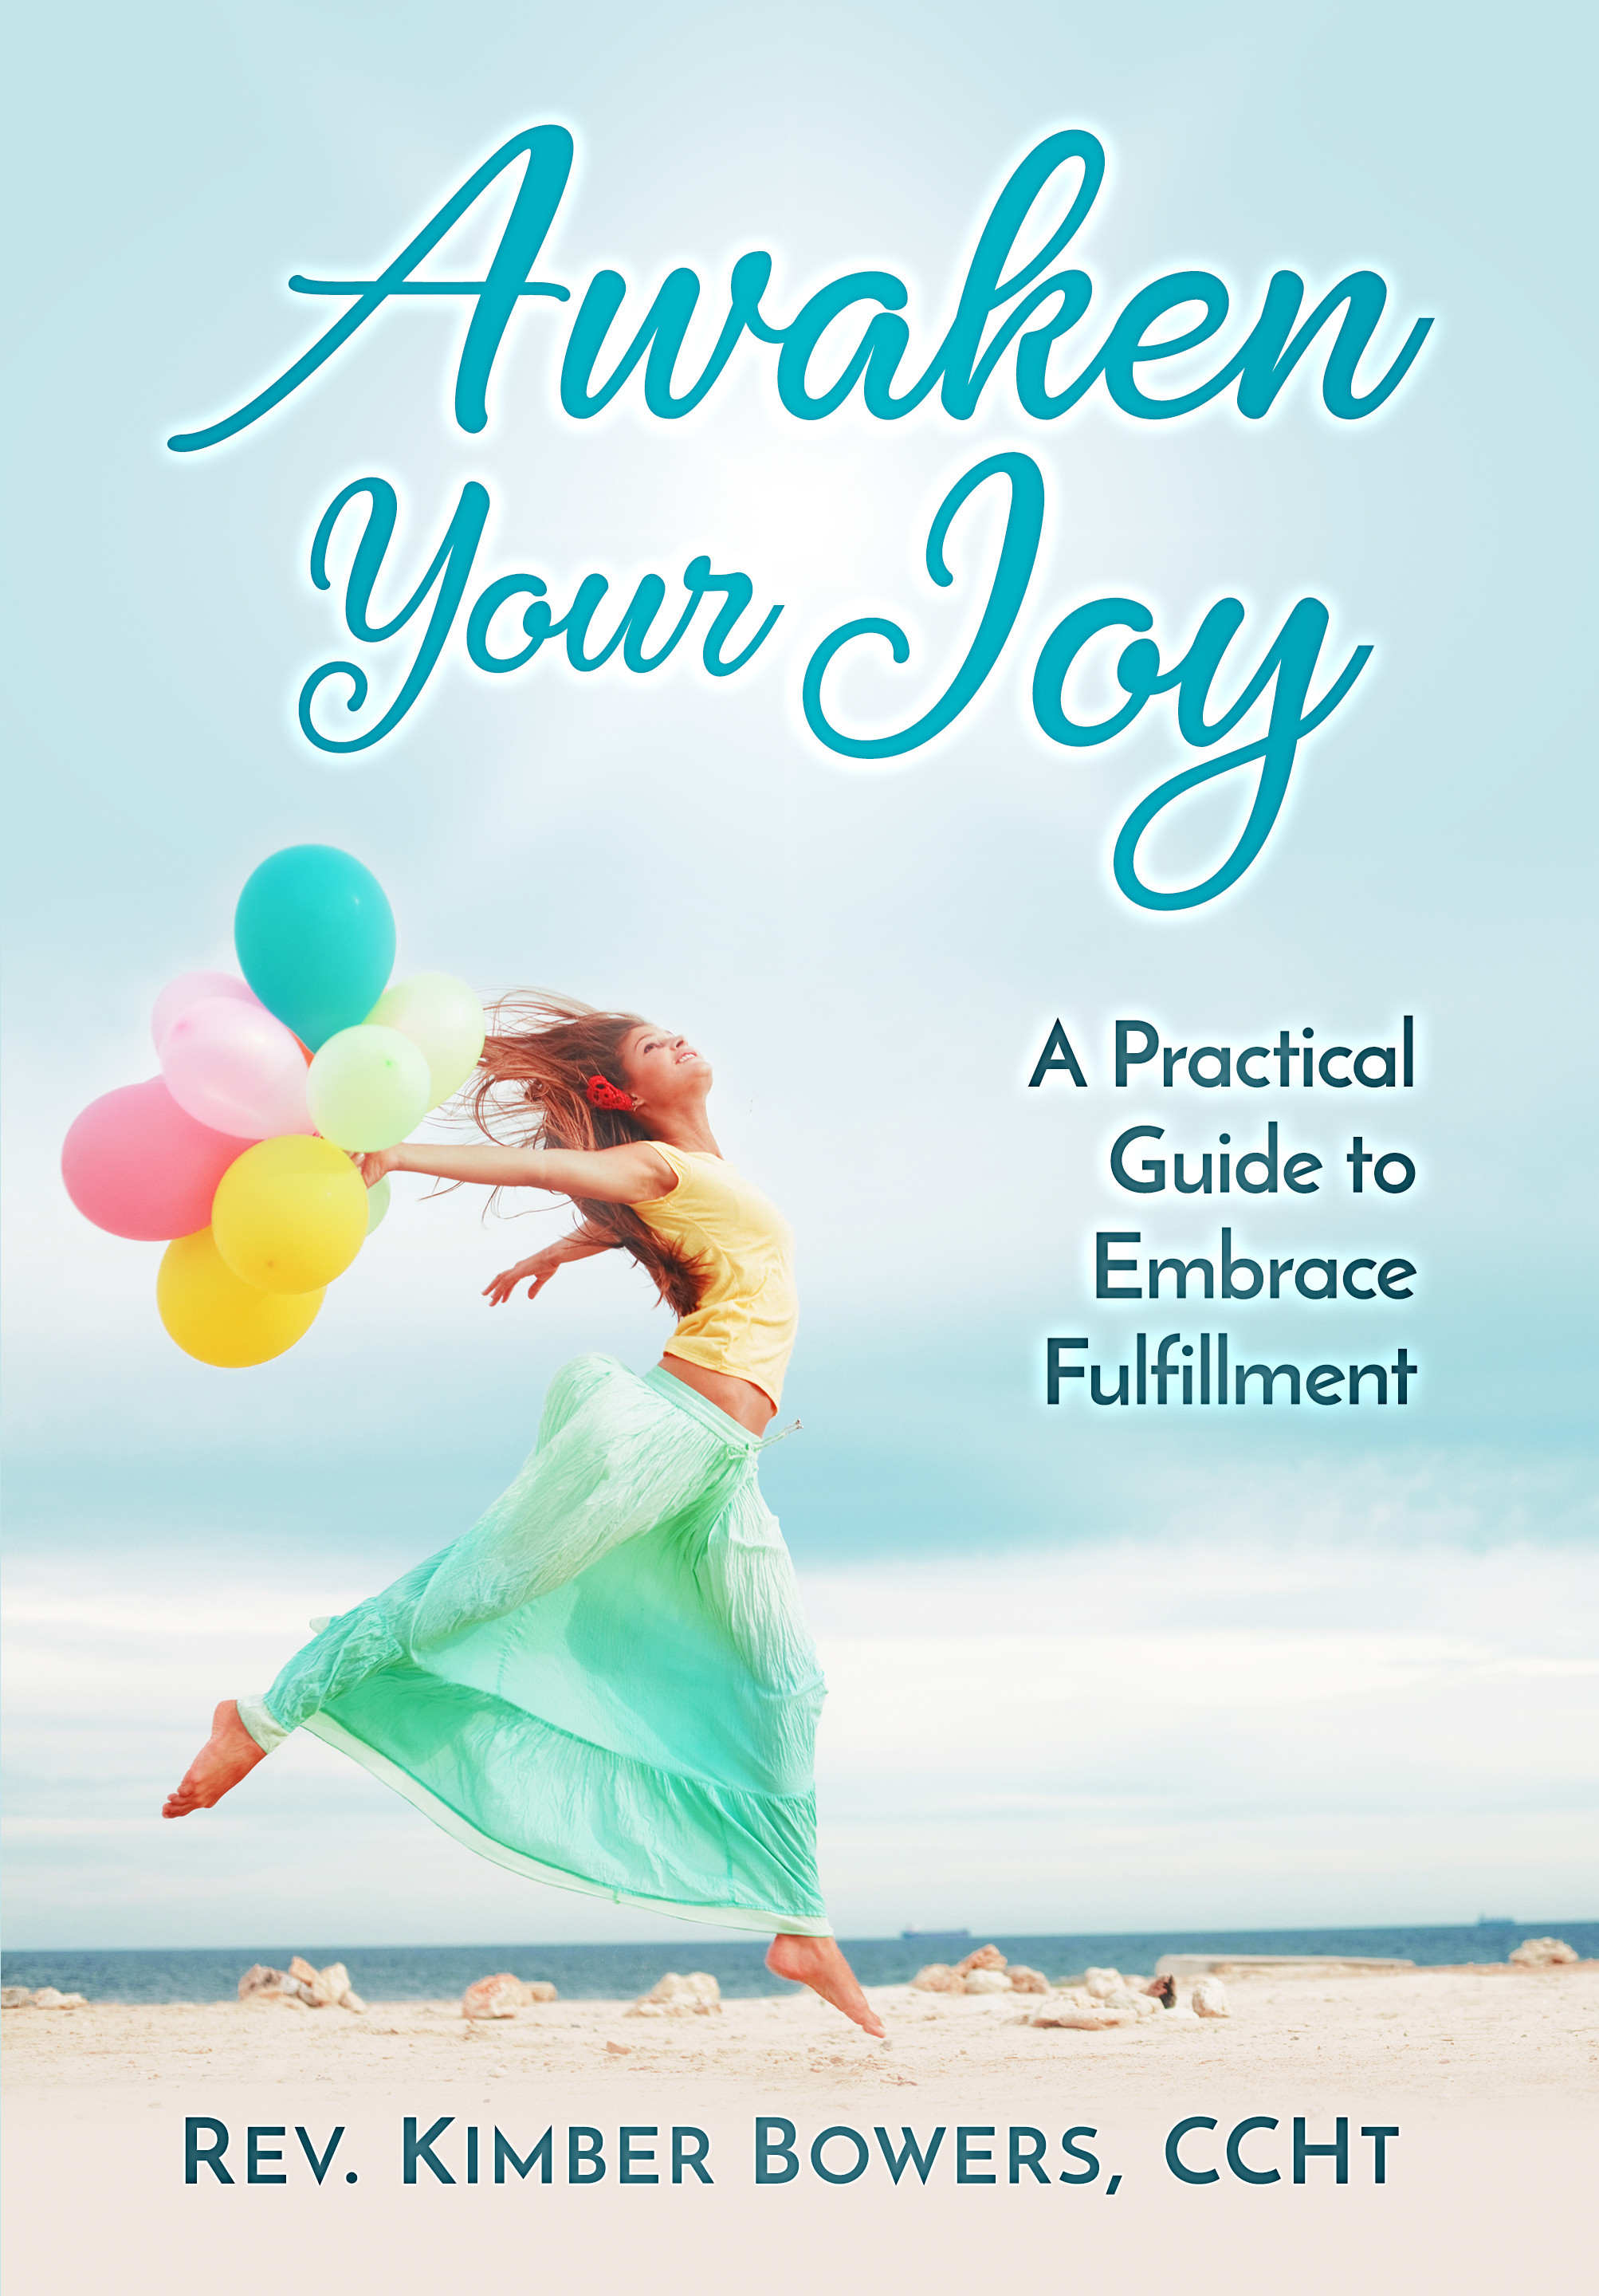 FREE: Awaken Your Joy: A Practical Guide To Embrace Fulfillment by Rev Kimber Bowers CCHt